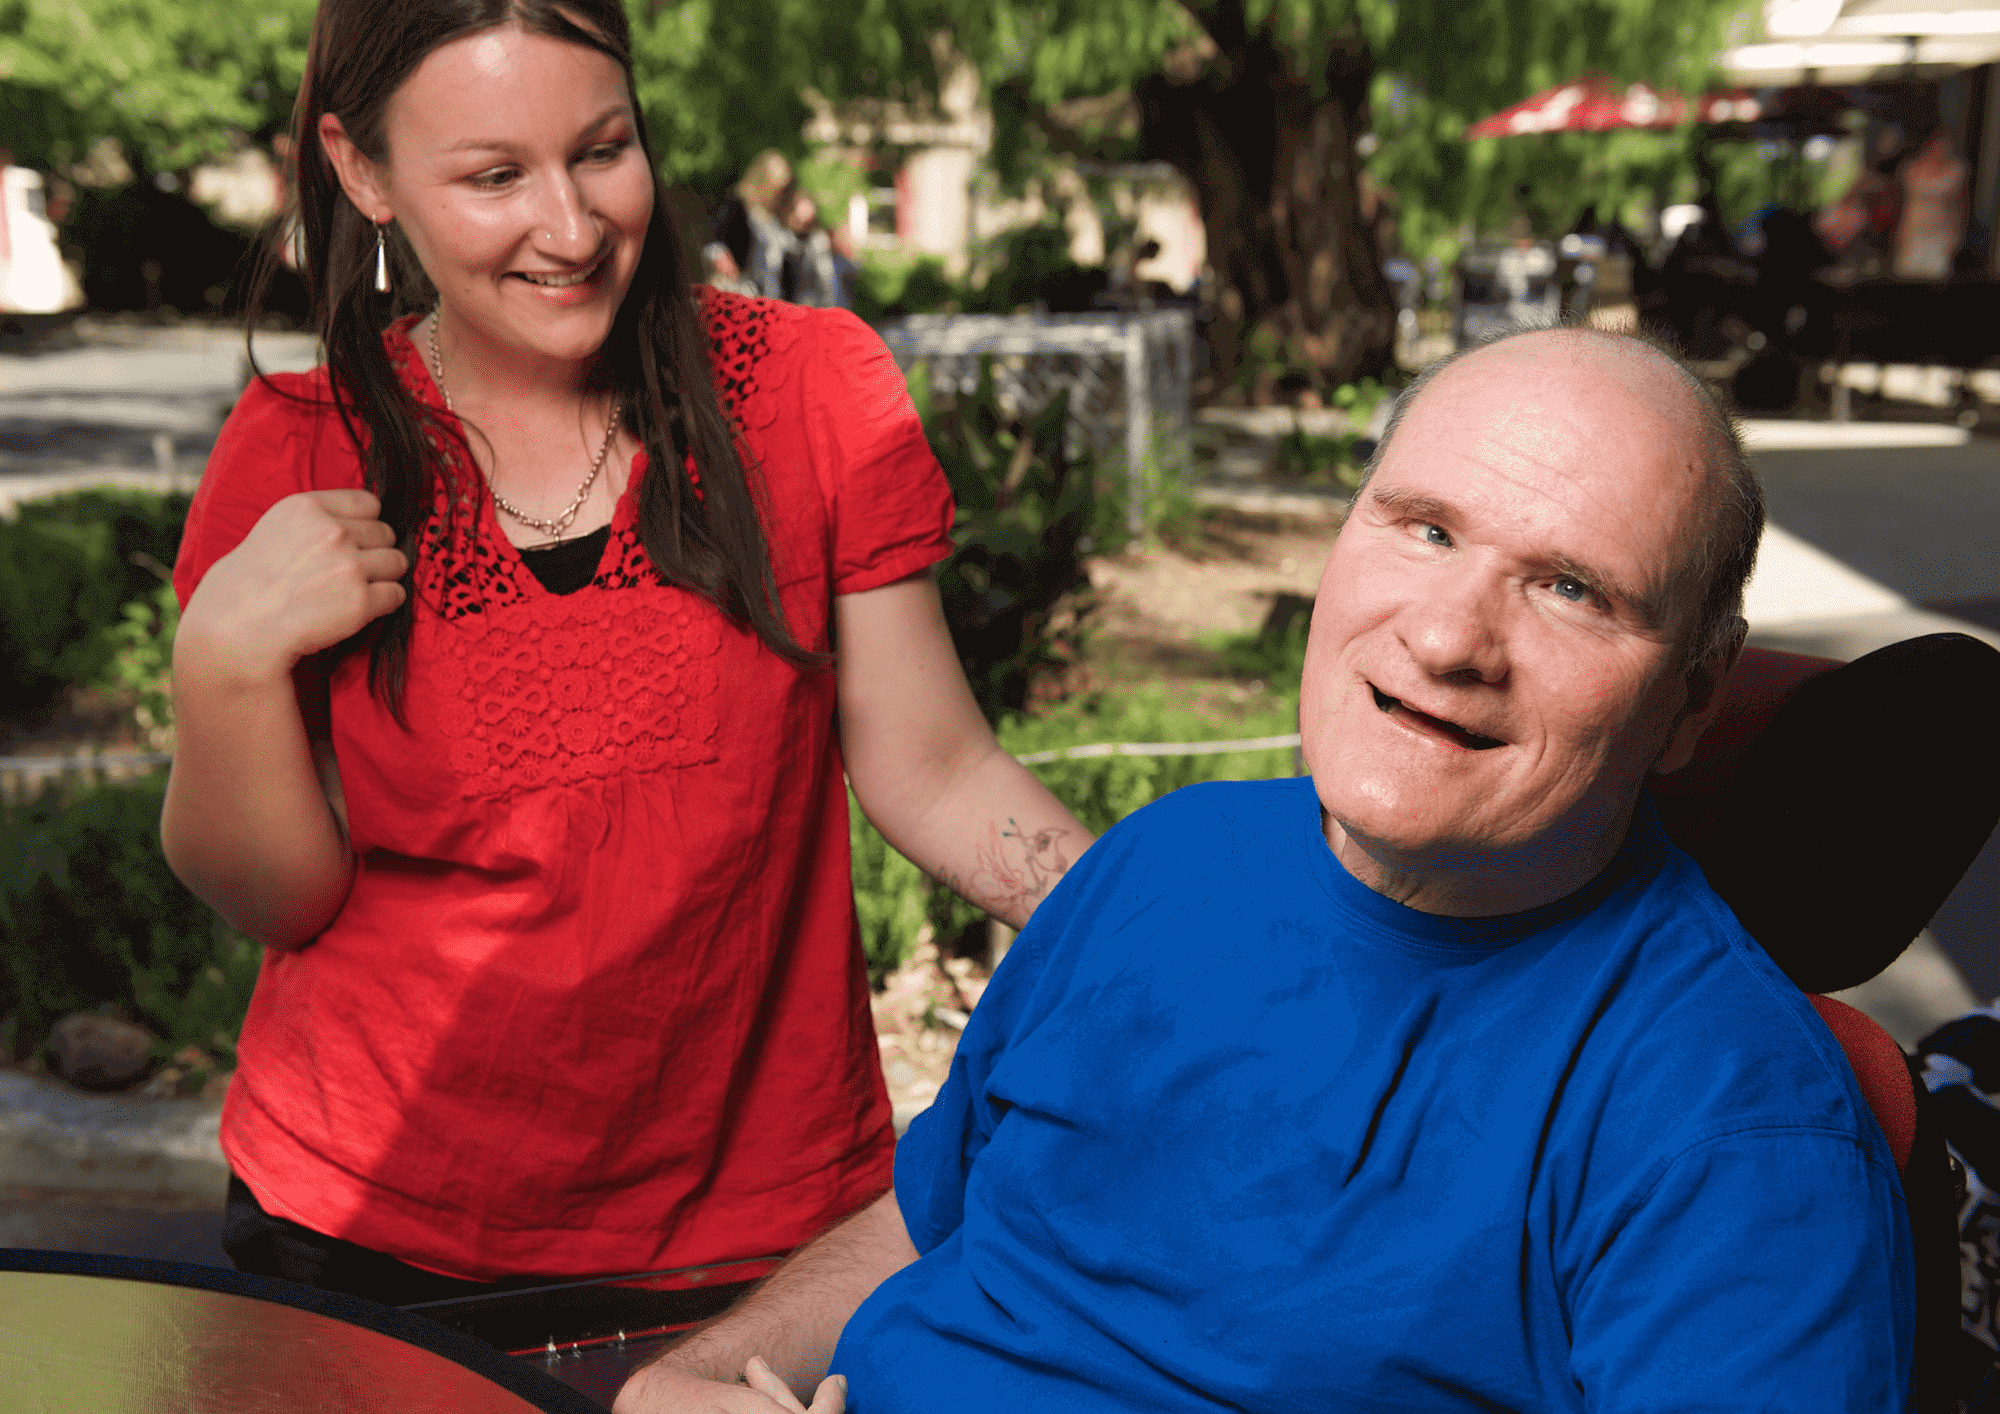 Claro Aged Care and Disability Services: Providing Independence And Choice For All